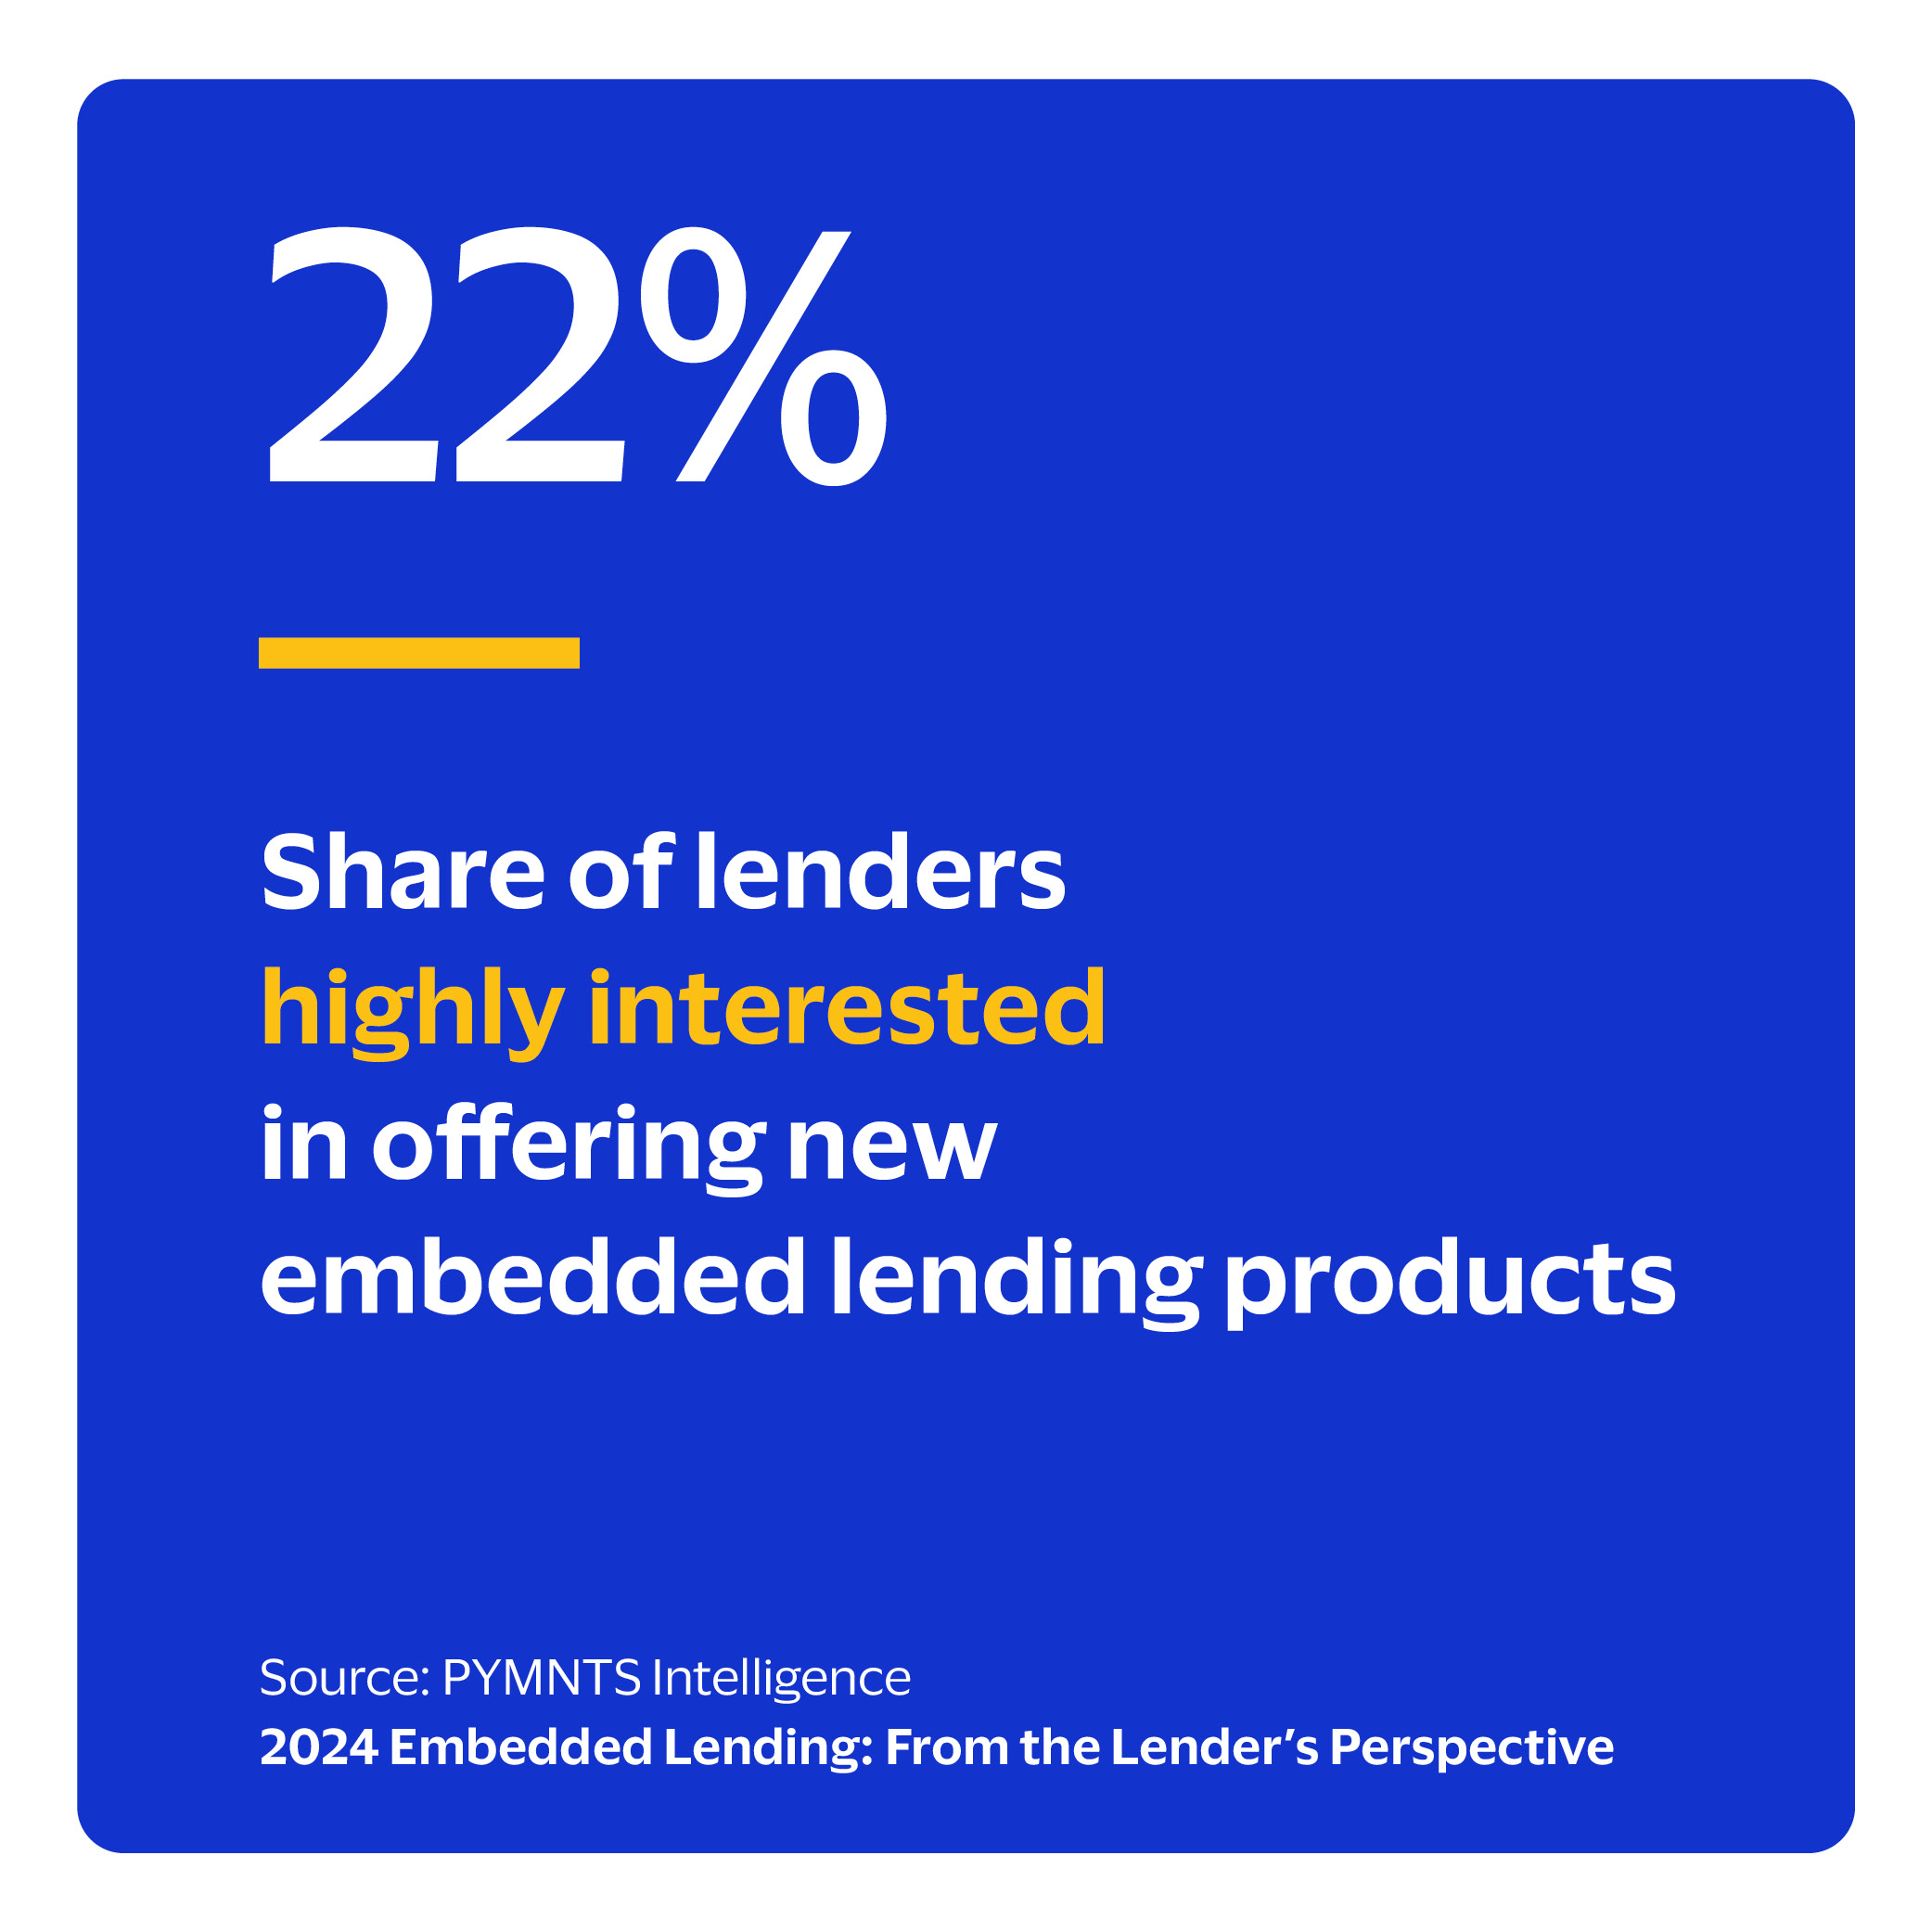 22%: Share of lenders highly interested in offering new embedded lending products in the next two years